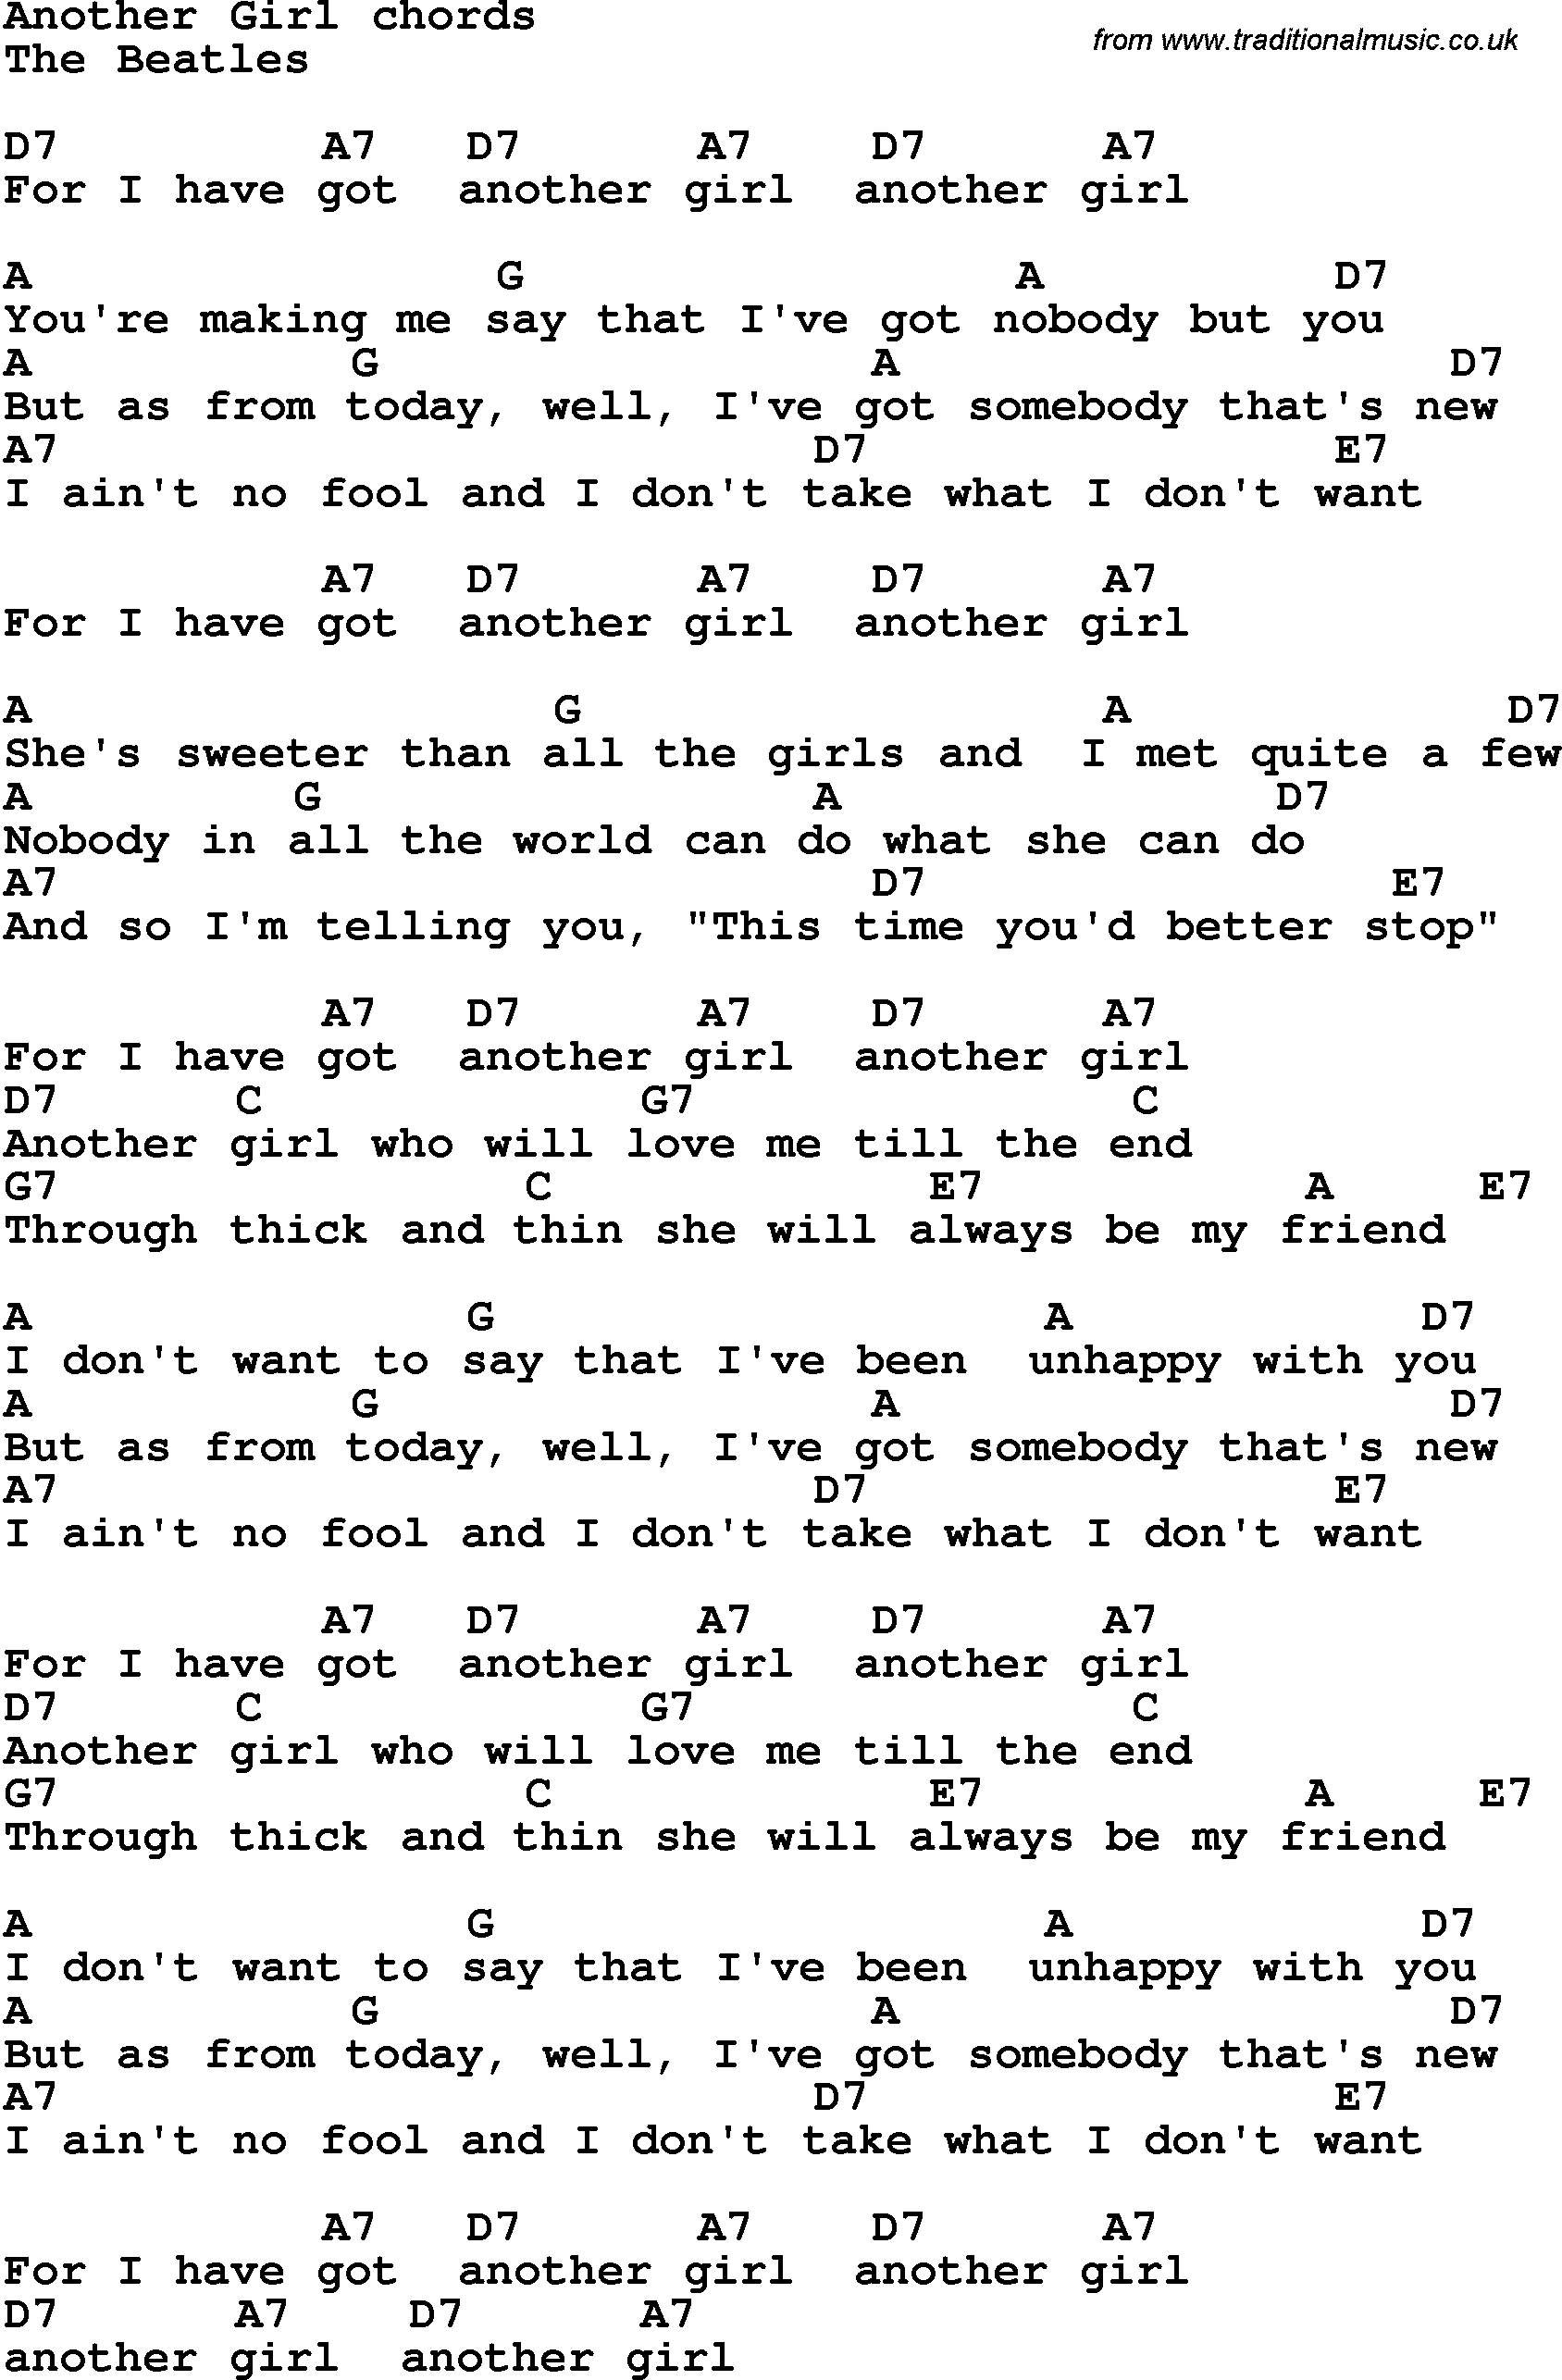 Song Lyrics with guitar chords for Another Girl - The Beatles